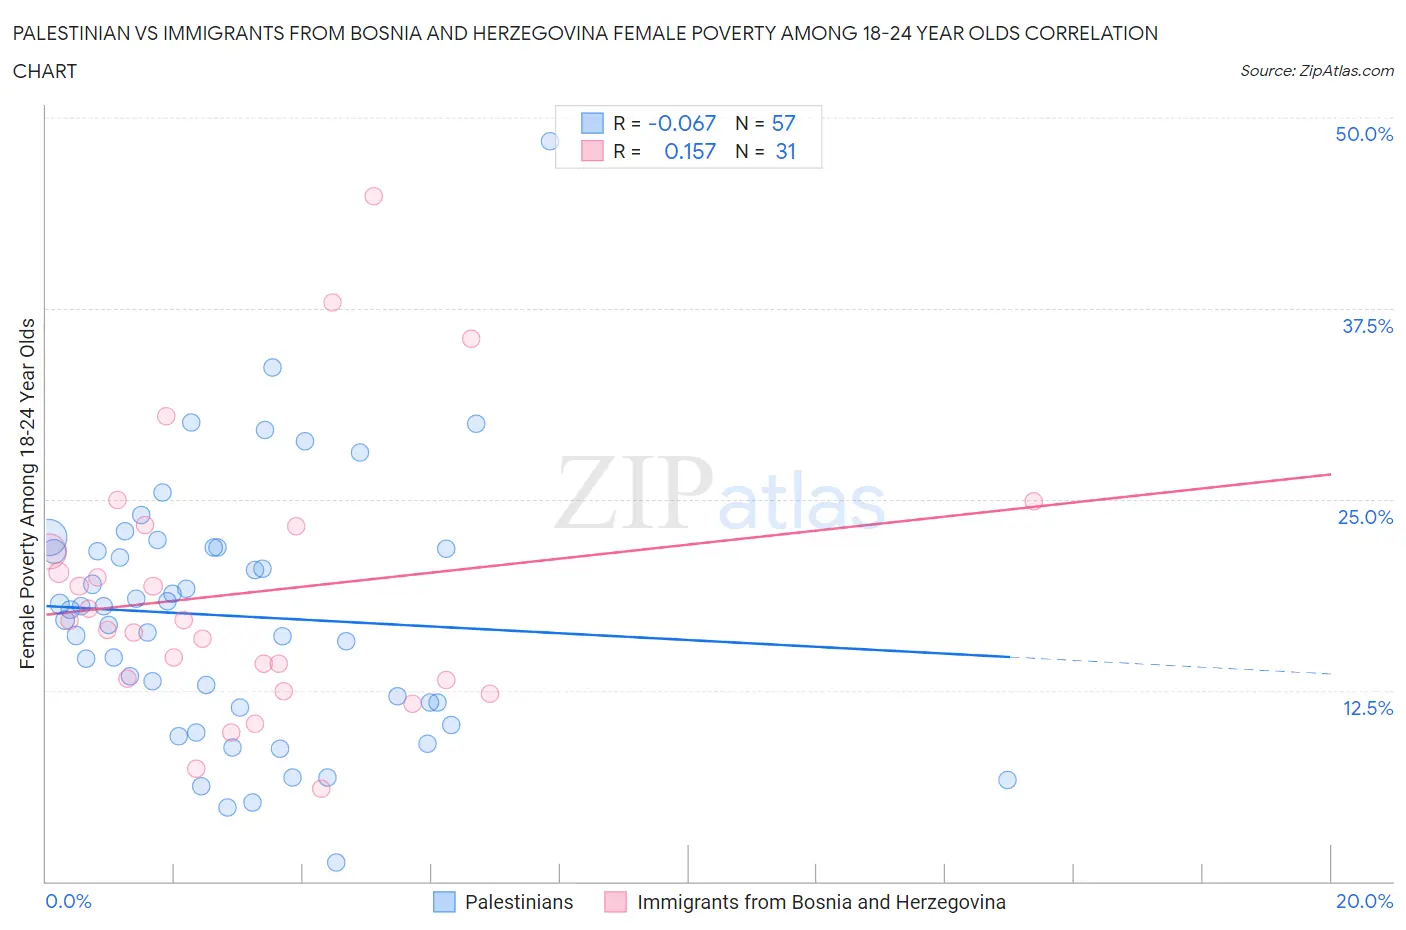 Palestinian vs Immigrants from Bosnia and Herzegovina Female Poverty Among 18-24 Year Olds